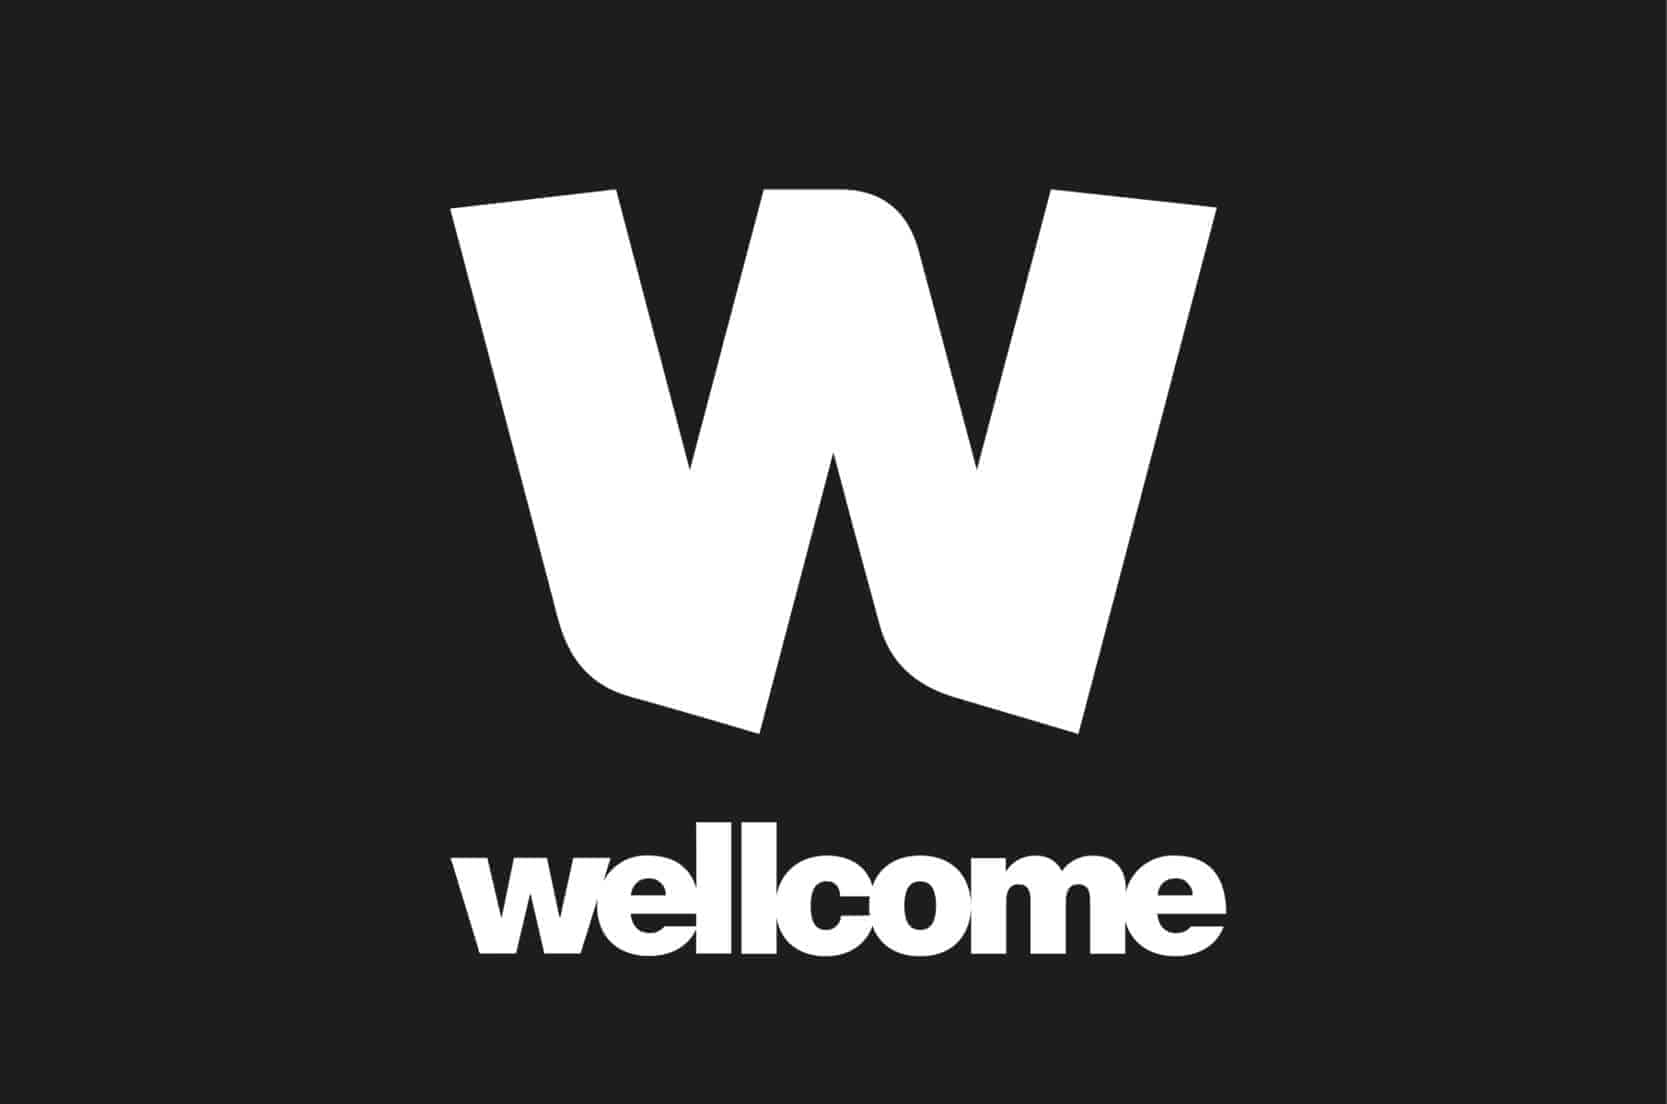 Research Manager: Wellcome modelling job opportunity